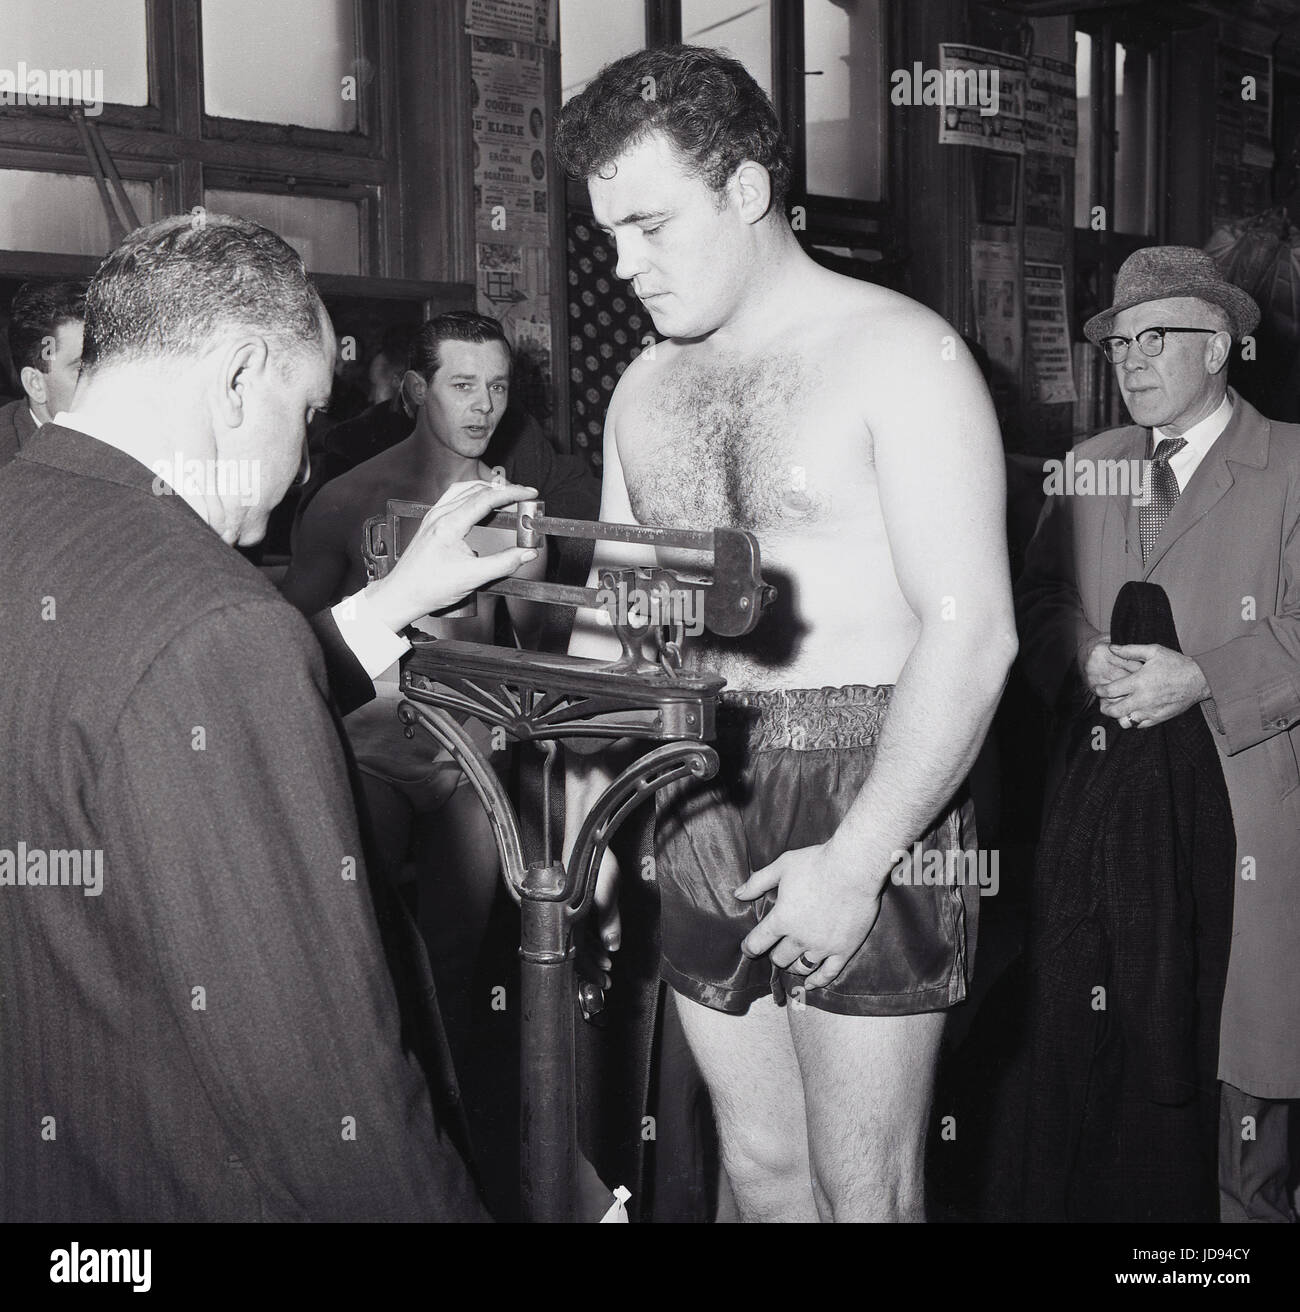 1964, the gym at the famous Thomas A Beckett public house on the Old Kent Road, Bermondsey, South London, SE1, England, picture shows a boxer being officially weighed in on mechanical scales before a contest. Stock Photo